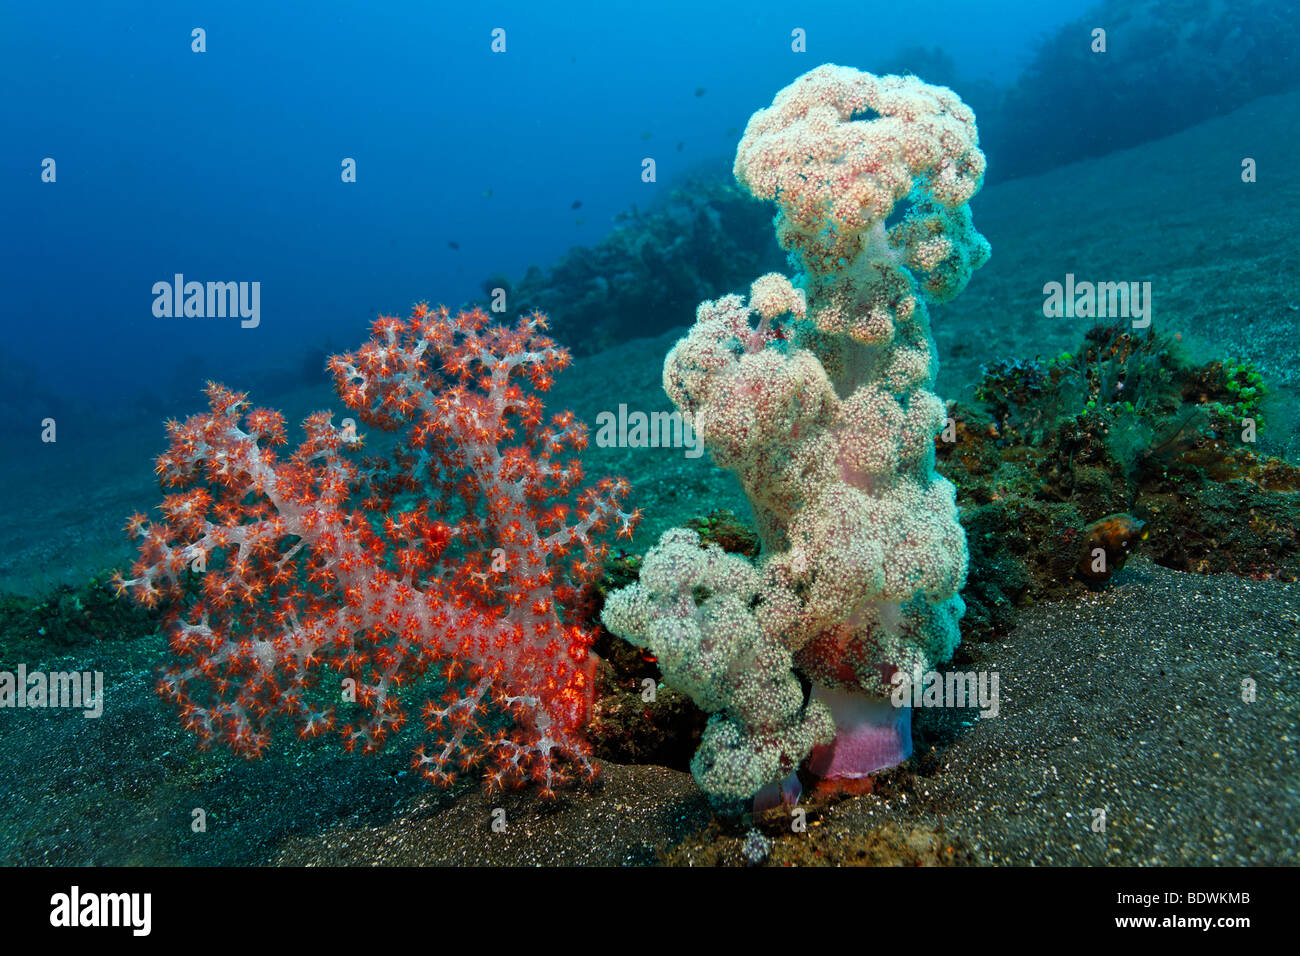 Group of soft corals (Dendronephthya mucronata) and Klunzinger's soft coral (Dendronephthya klunzingeri) on sandy ground, reef, Stock Photo